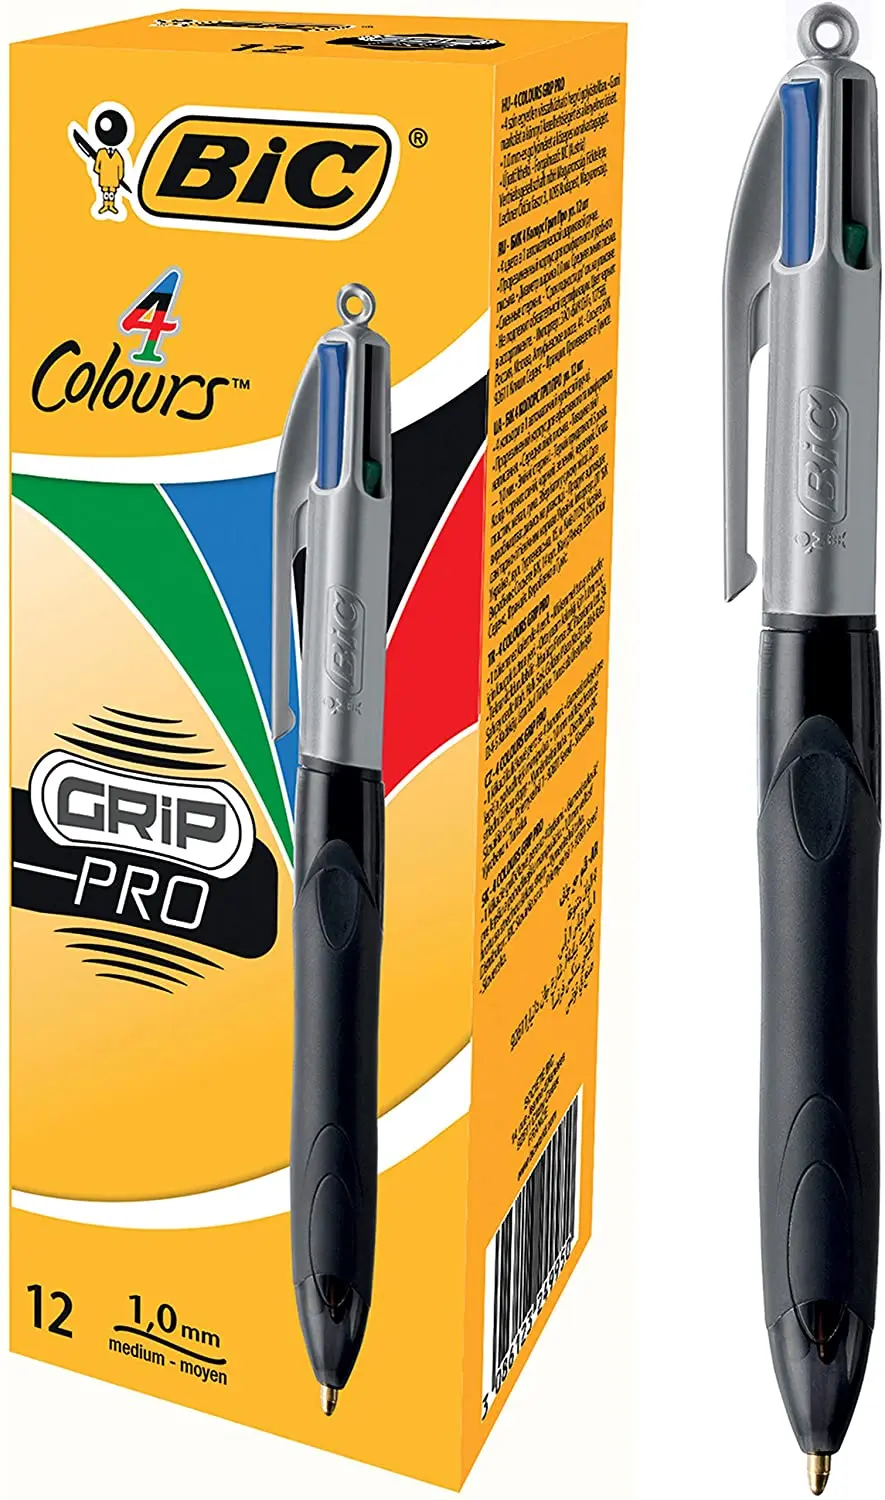 

Bic 4 Colours Grip Pro Ballpoint Pen,Box of 12, Medium Point, 1,0mm, Black, blue, Red and Green Ink, Original Product